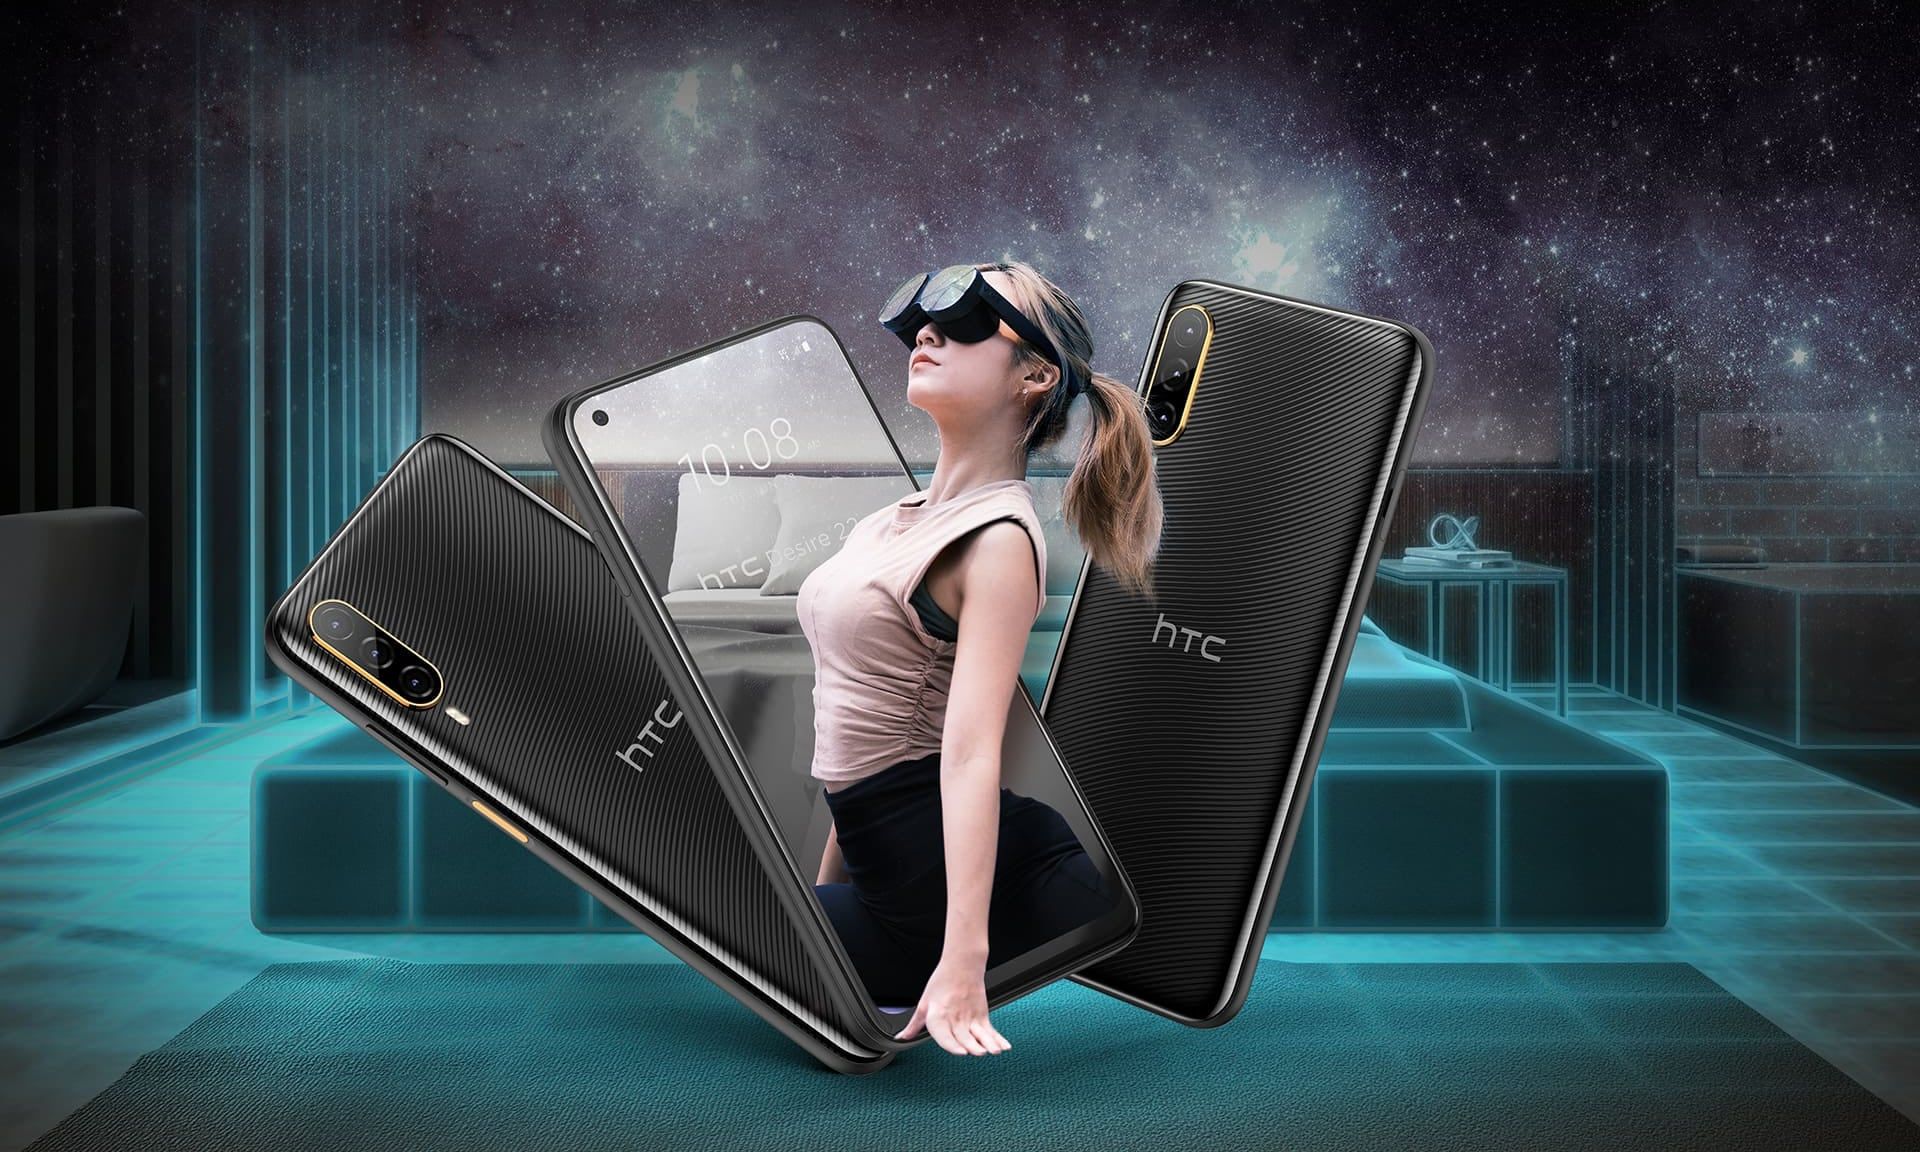 HTC’s new metaverse phone is official, and it’s as useless as you thought it would be